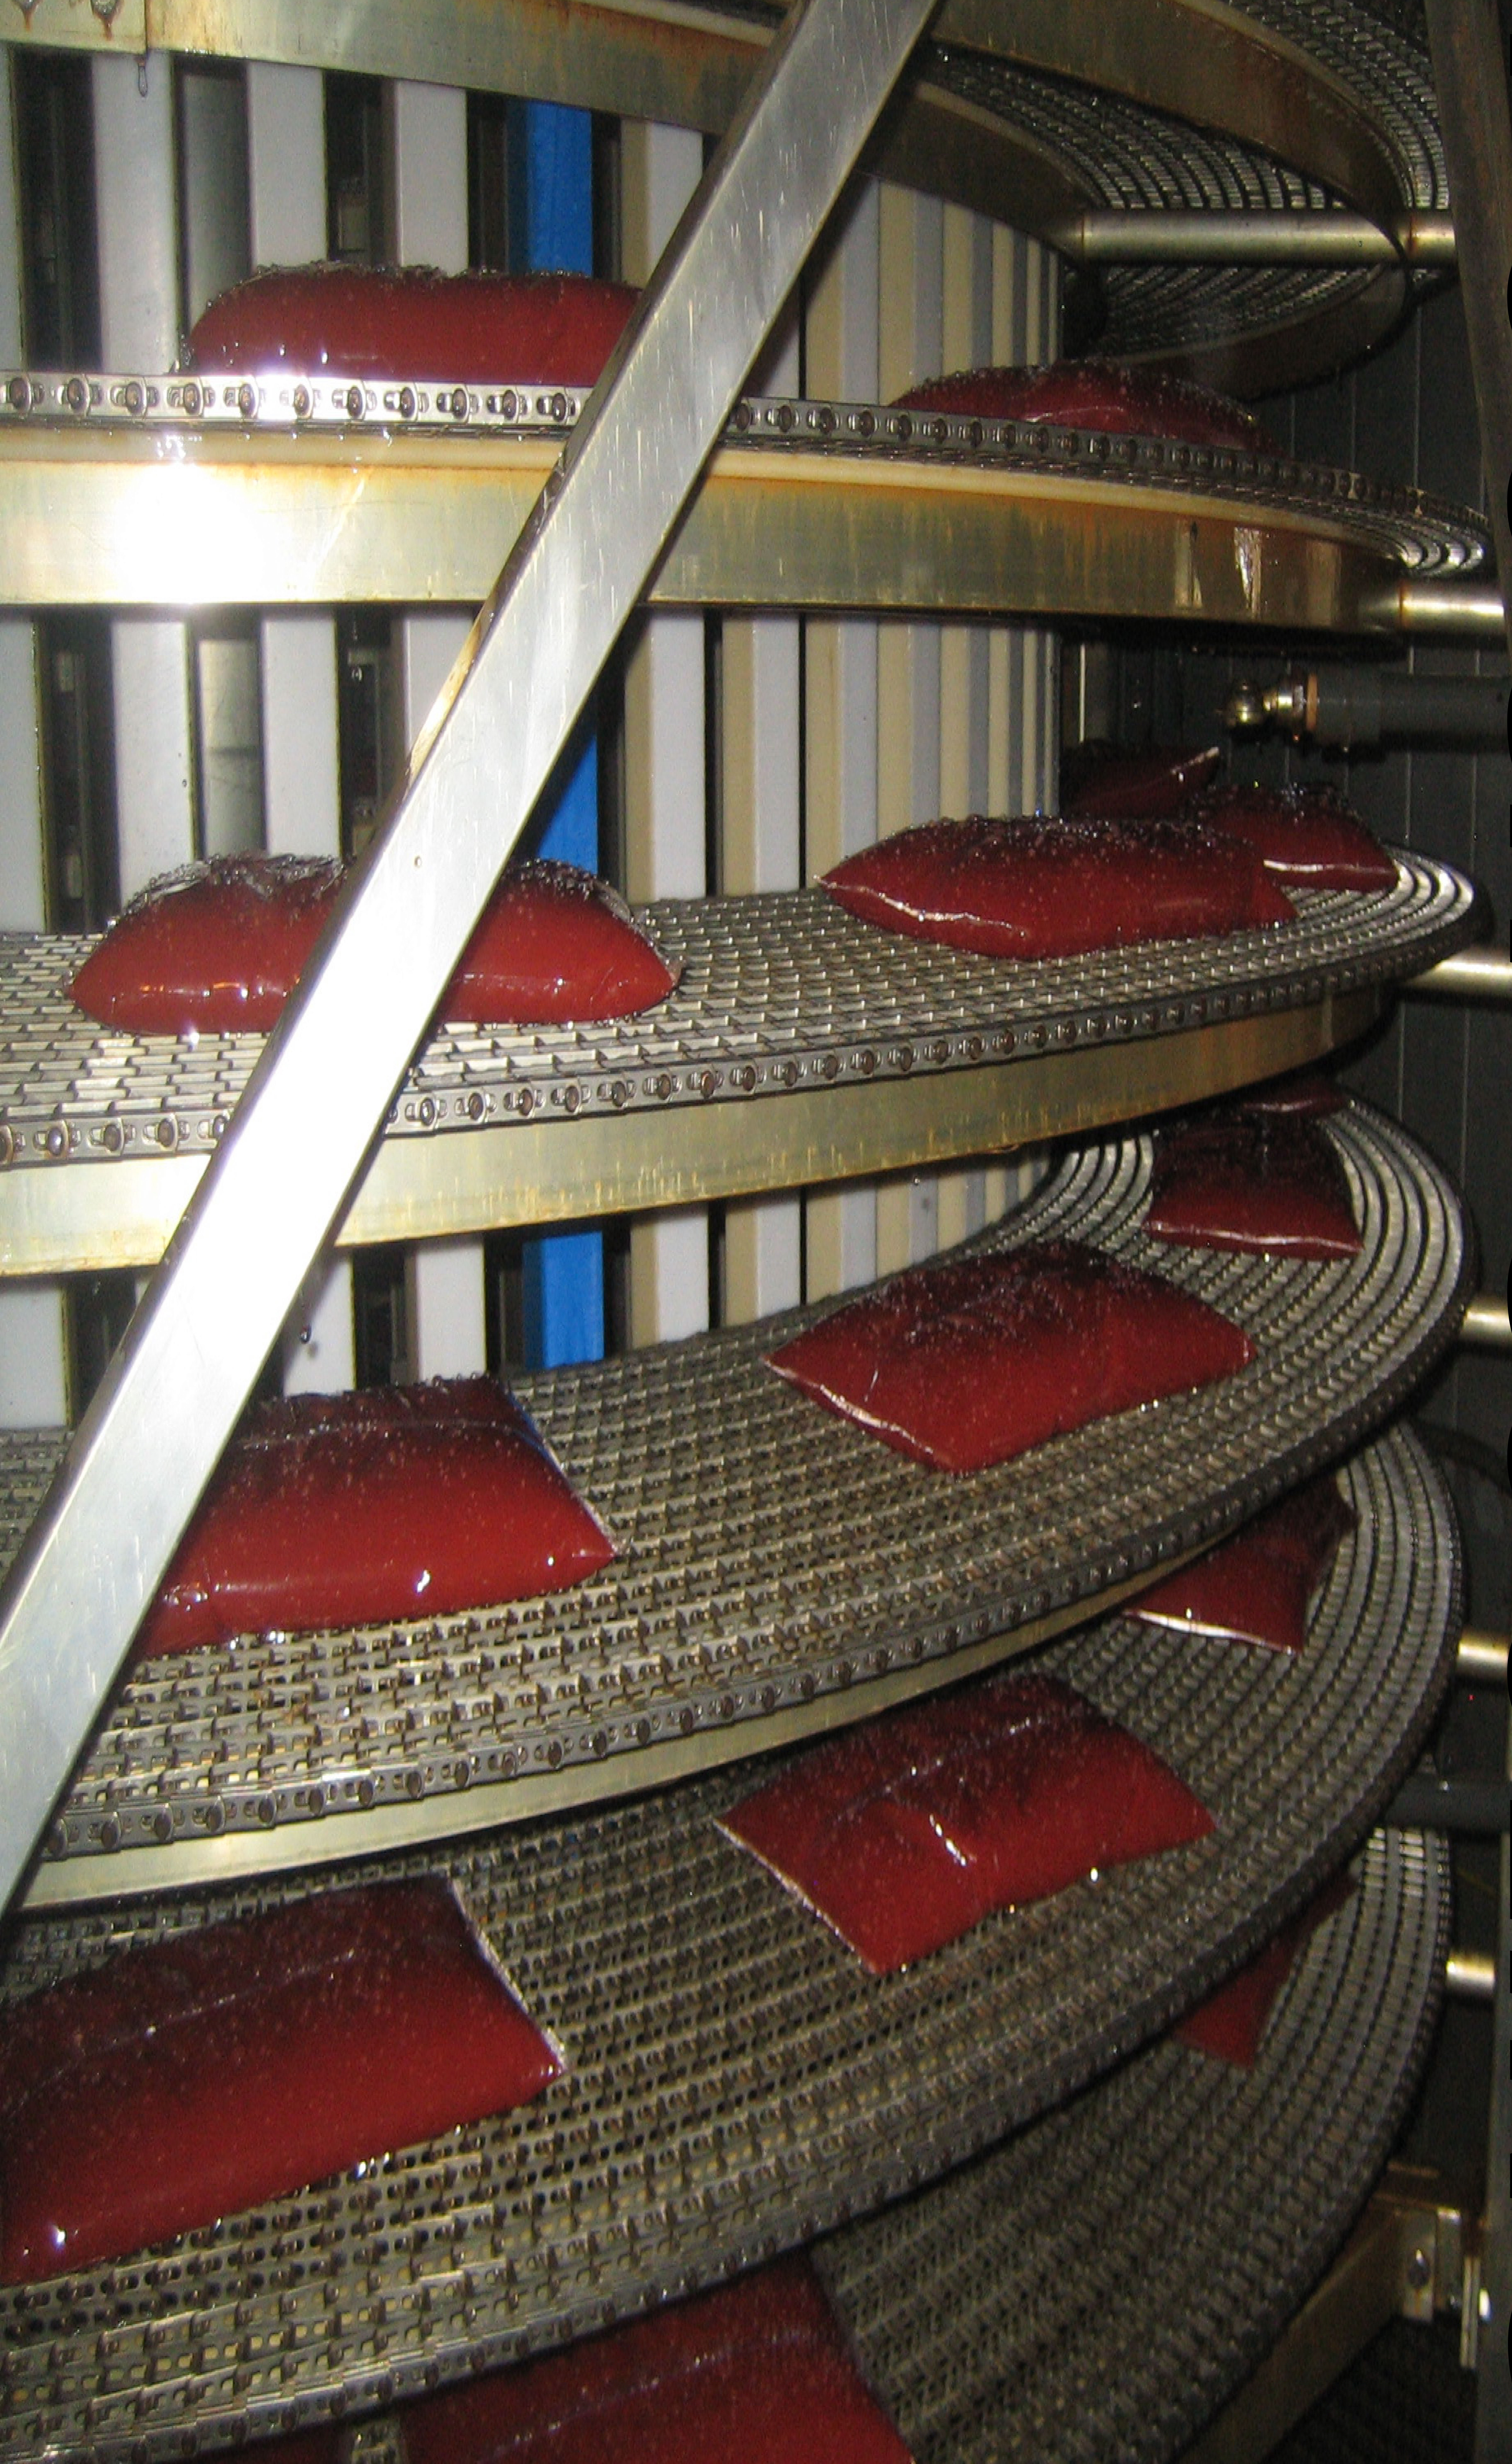 Tomato Sauce Pouches on an IJ White Ultra Series System